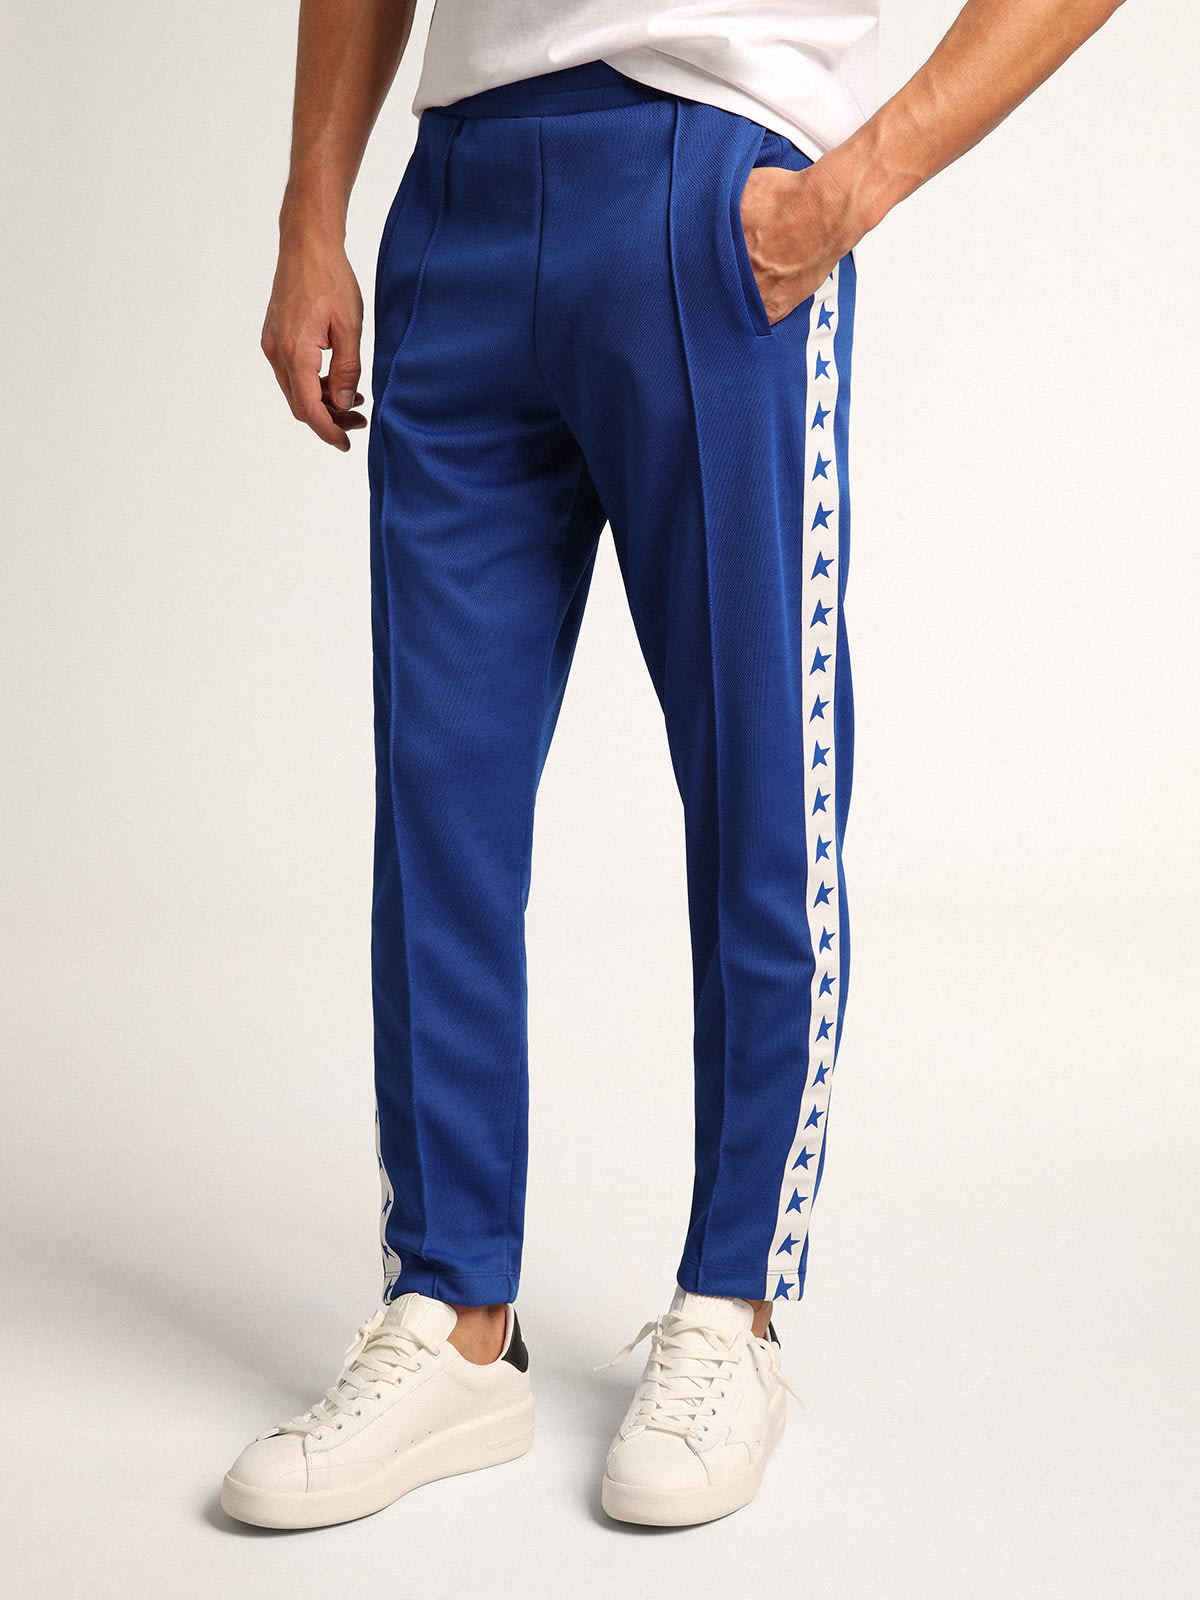 Golden Goose - Men's blue joggers with band and stars on the sides in 